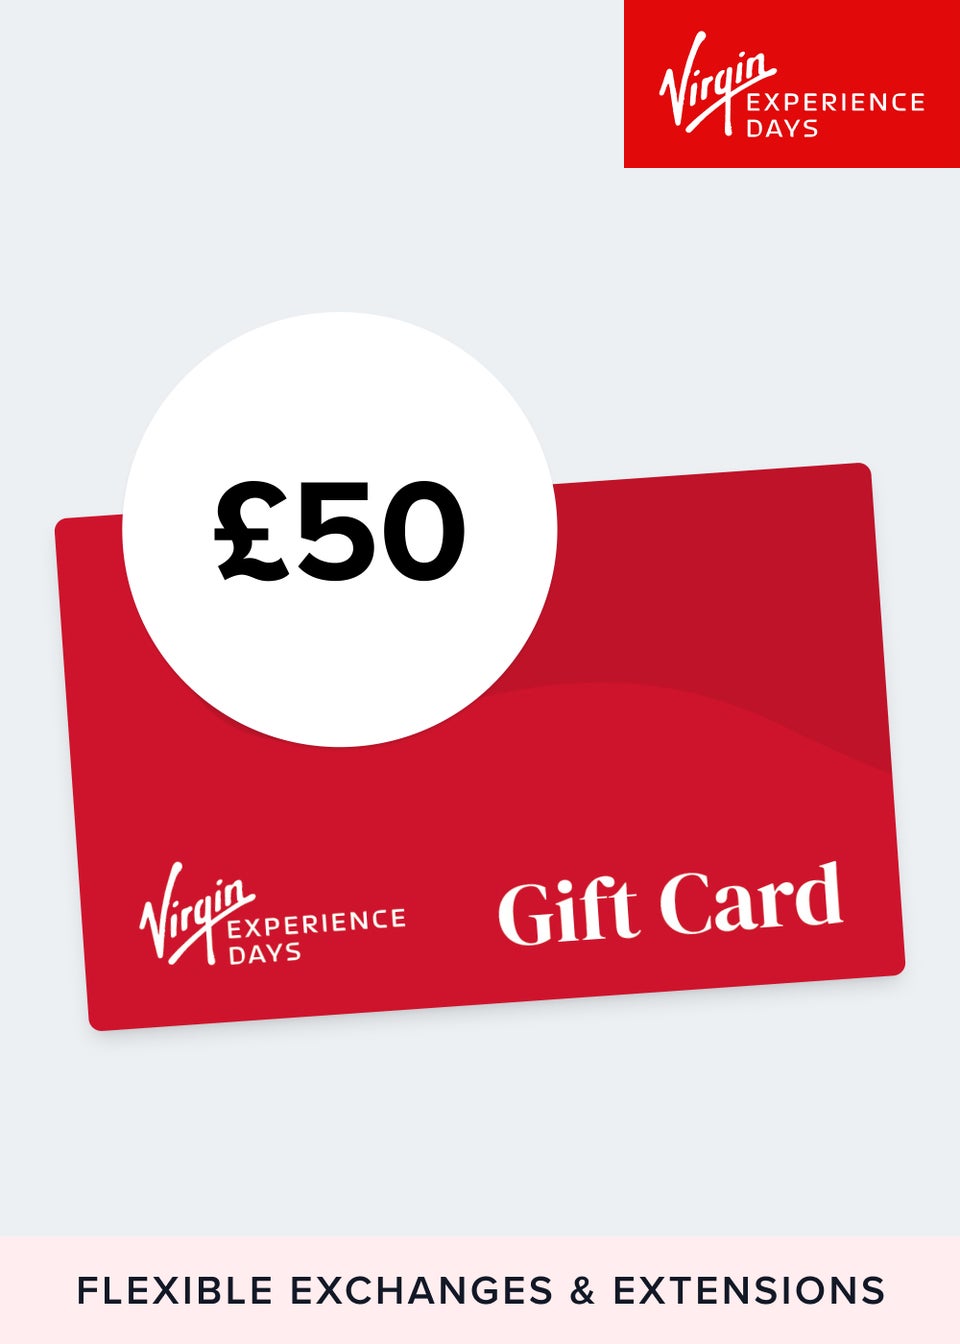 Virgin Experience Days £50 Gift Card